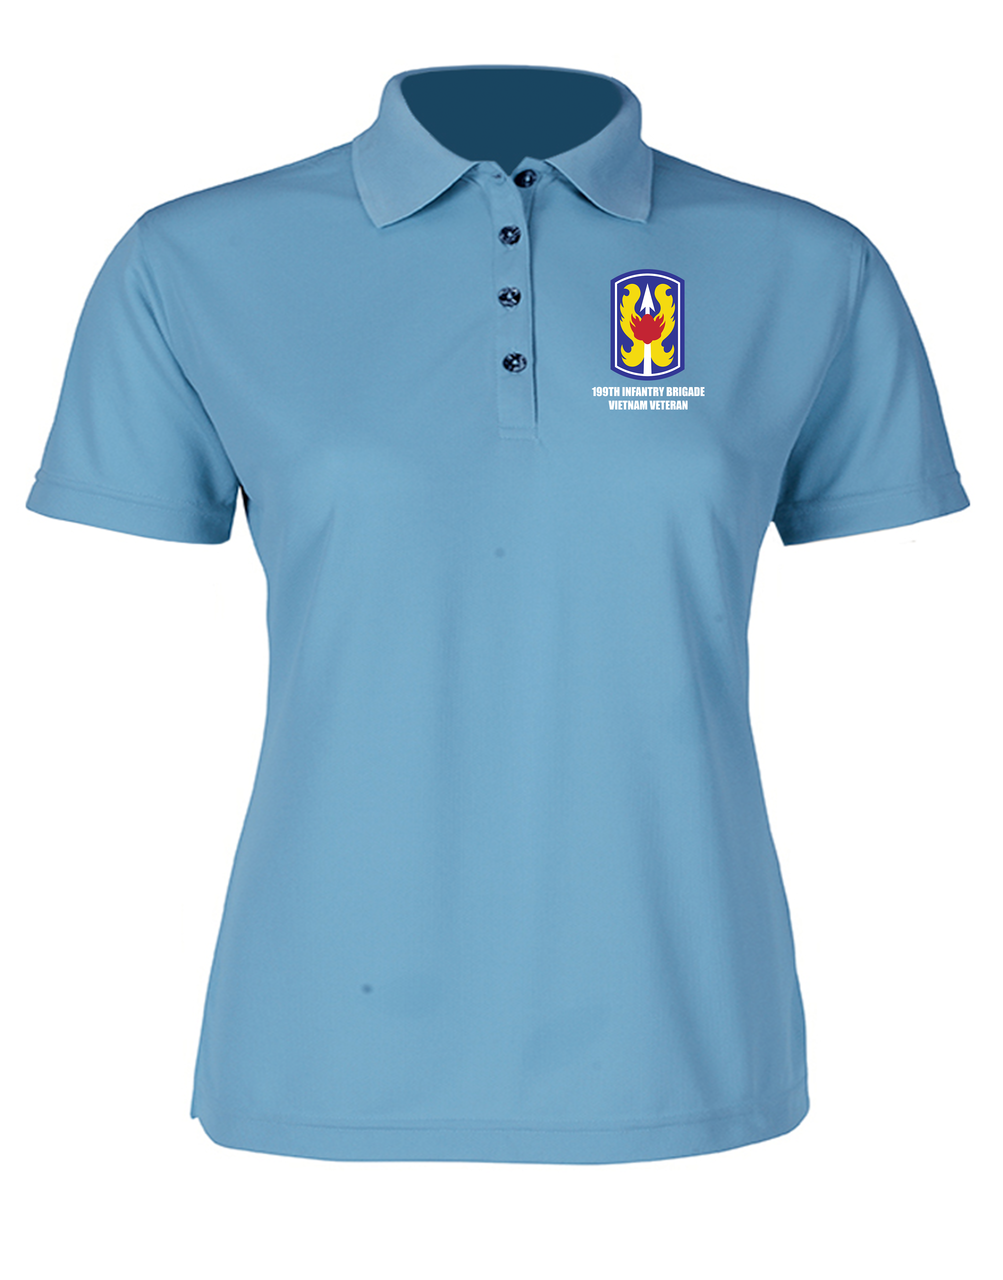 199th Light Infantry Brigade Ladies Embroidered Moisture Wick Polo Shirt